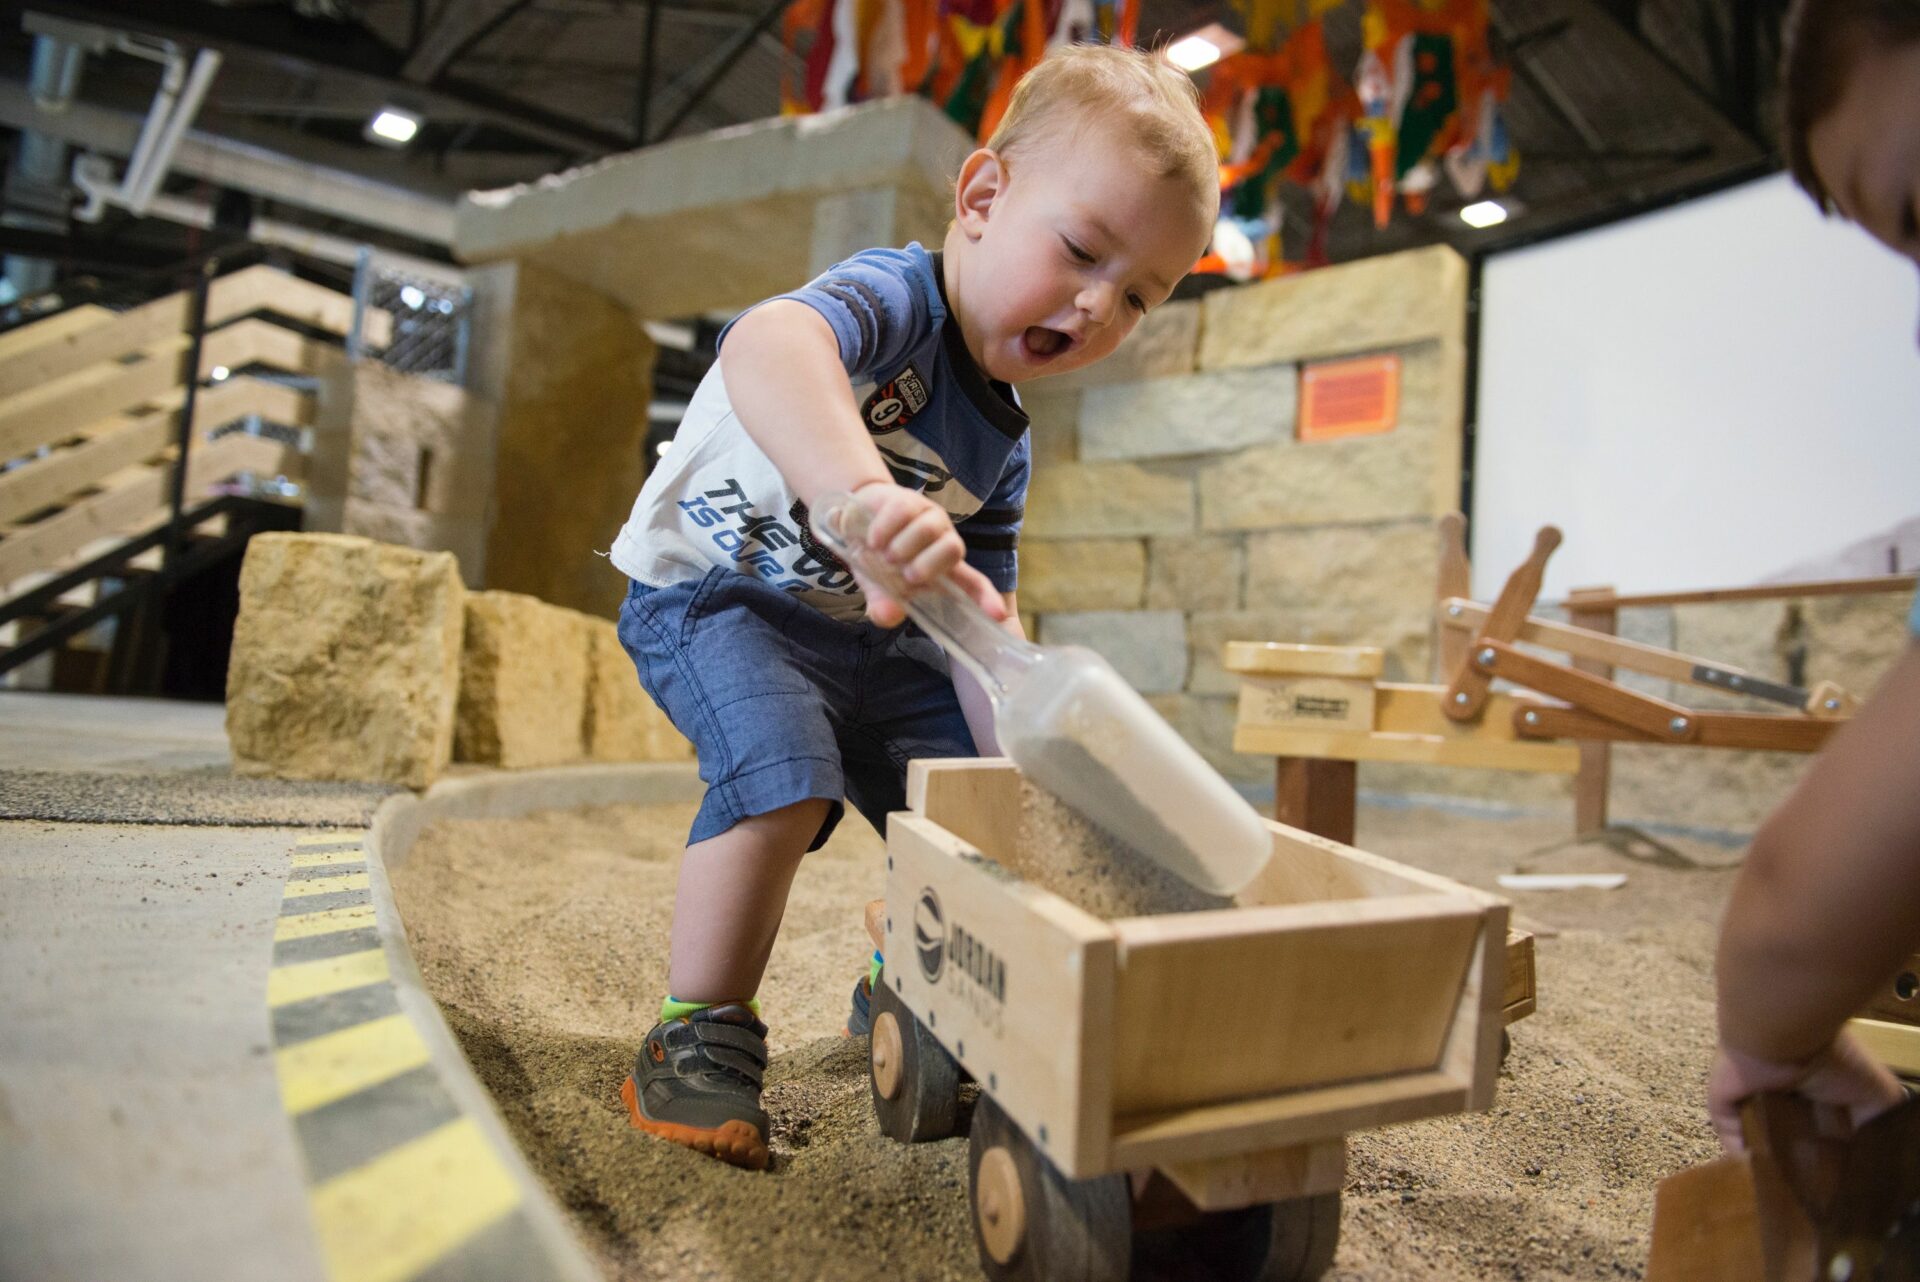 Coughlan Quarry at the Children's Museum of Southern Minnesota in Mankato